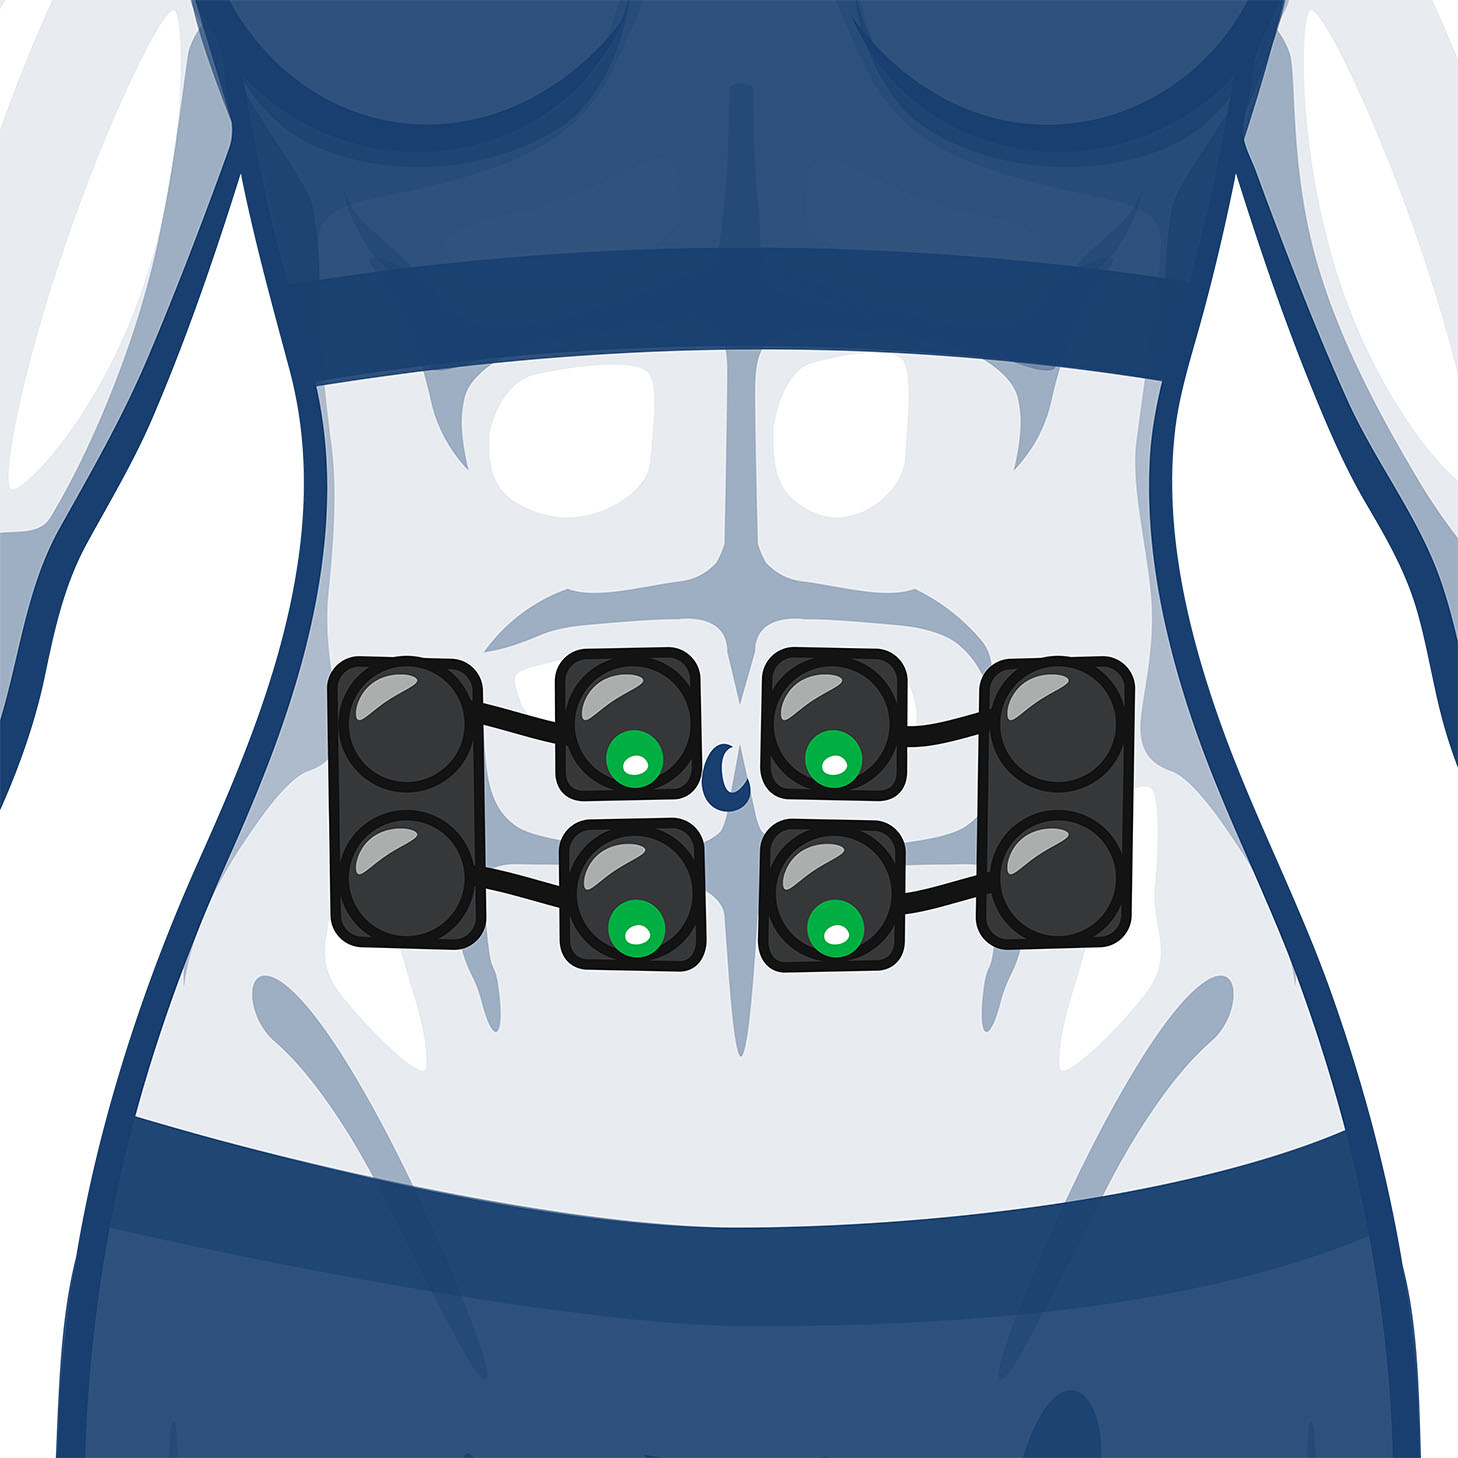 https://www.compex.com/media/wysiwyg/compex-eu/cms/electrode-placement/women/Wireless-Abs-1.jpg